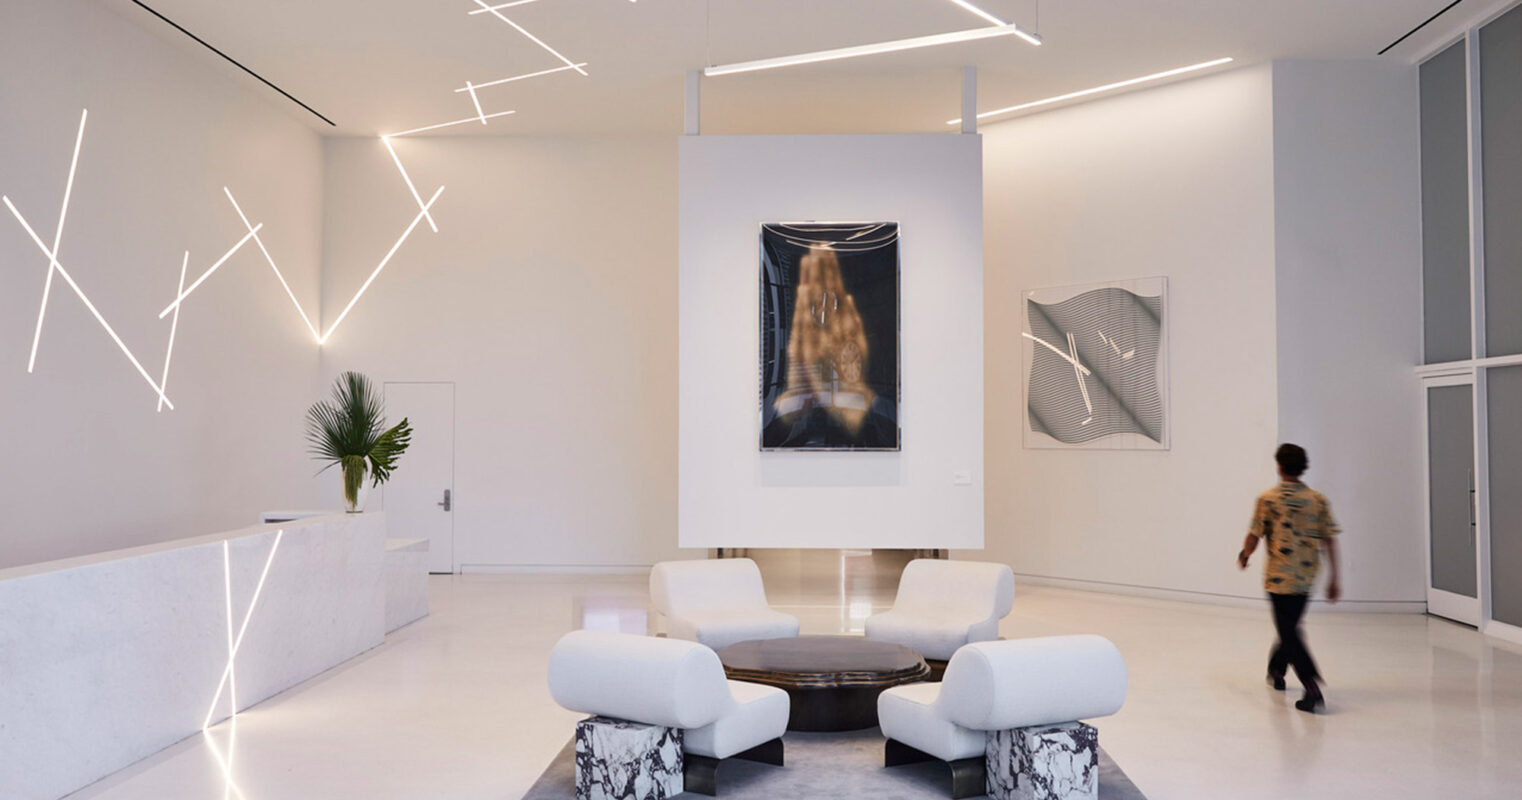 A sleek, modern art gallery space with geometric lighting fixtures, minimalist furniture, and large abstract artworks on the walls, as a person appreciates the art on display.